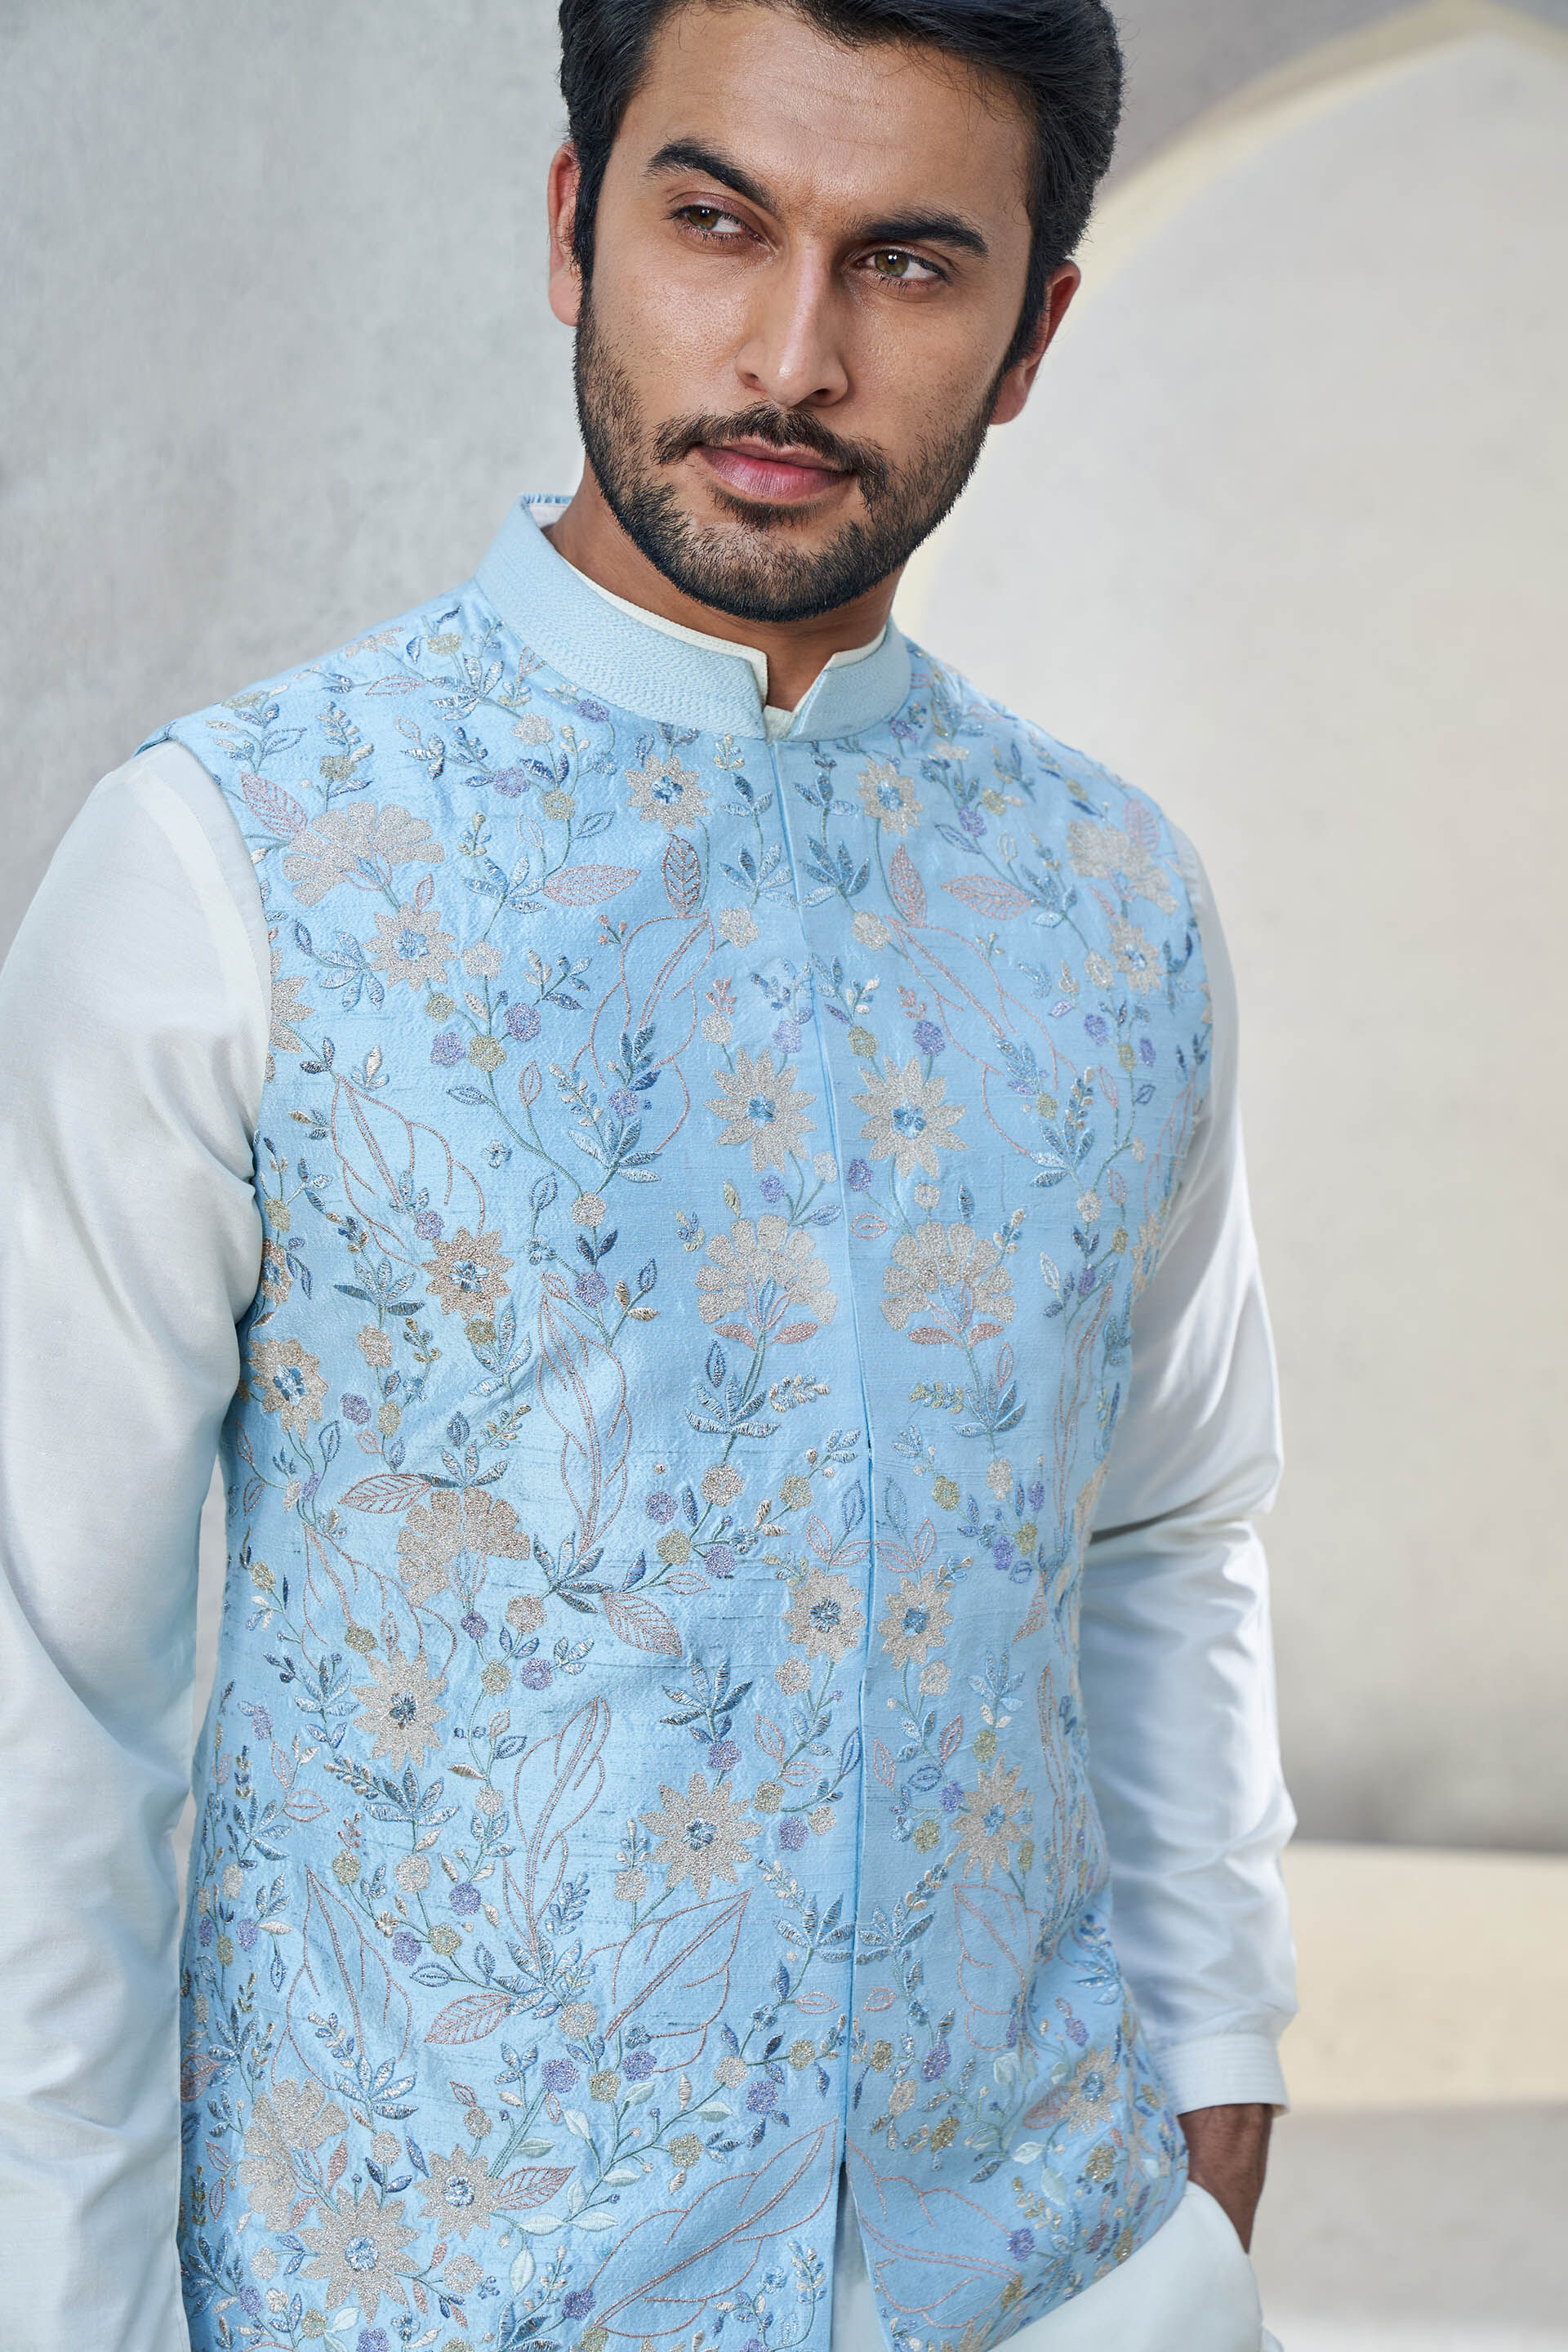 Stunning Choices to Make With Nehru Jacket for Wedding That Will Definitely  Add Swag to Your Wedding Look